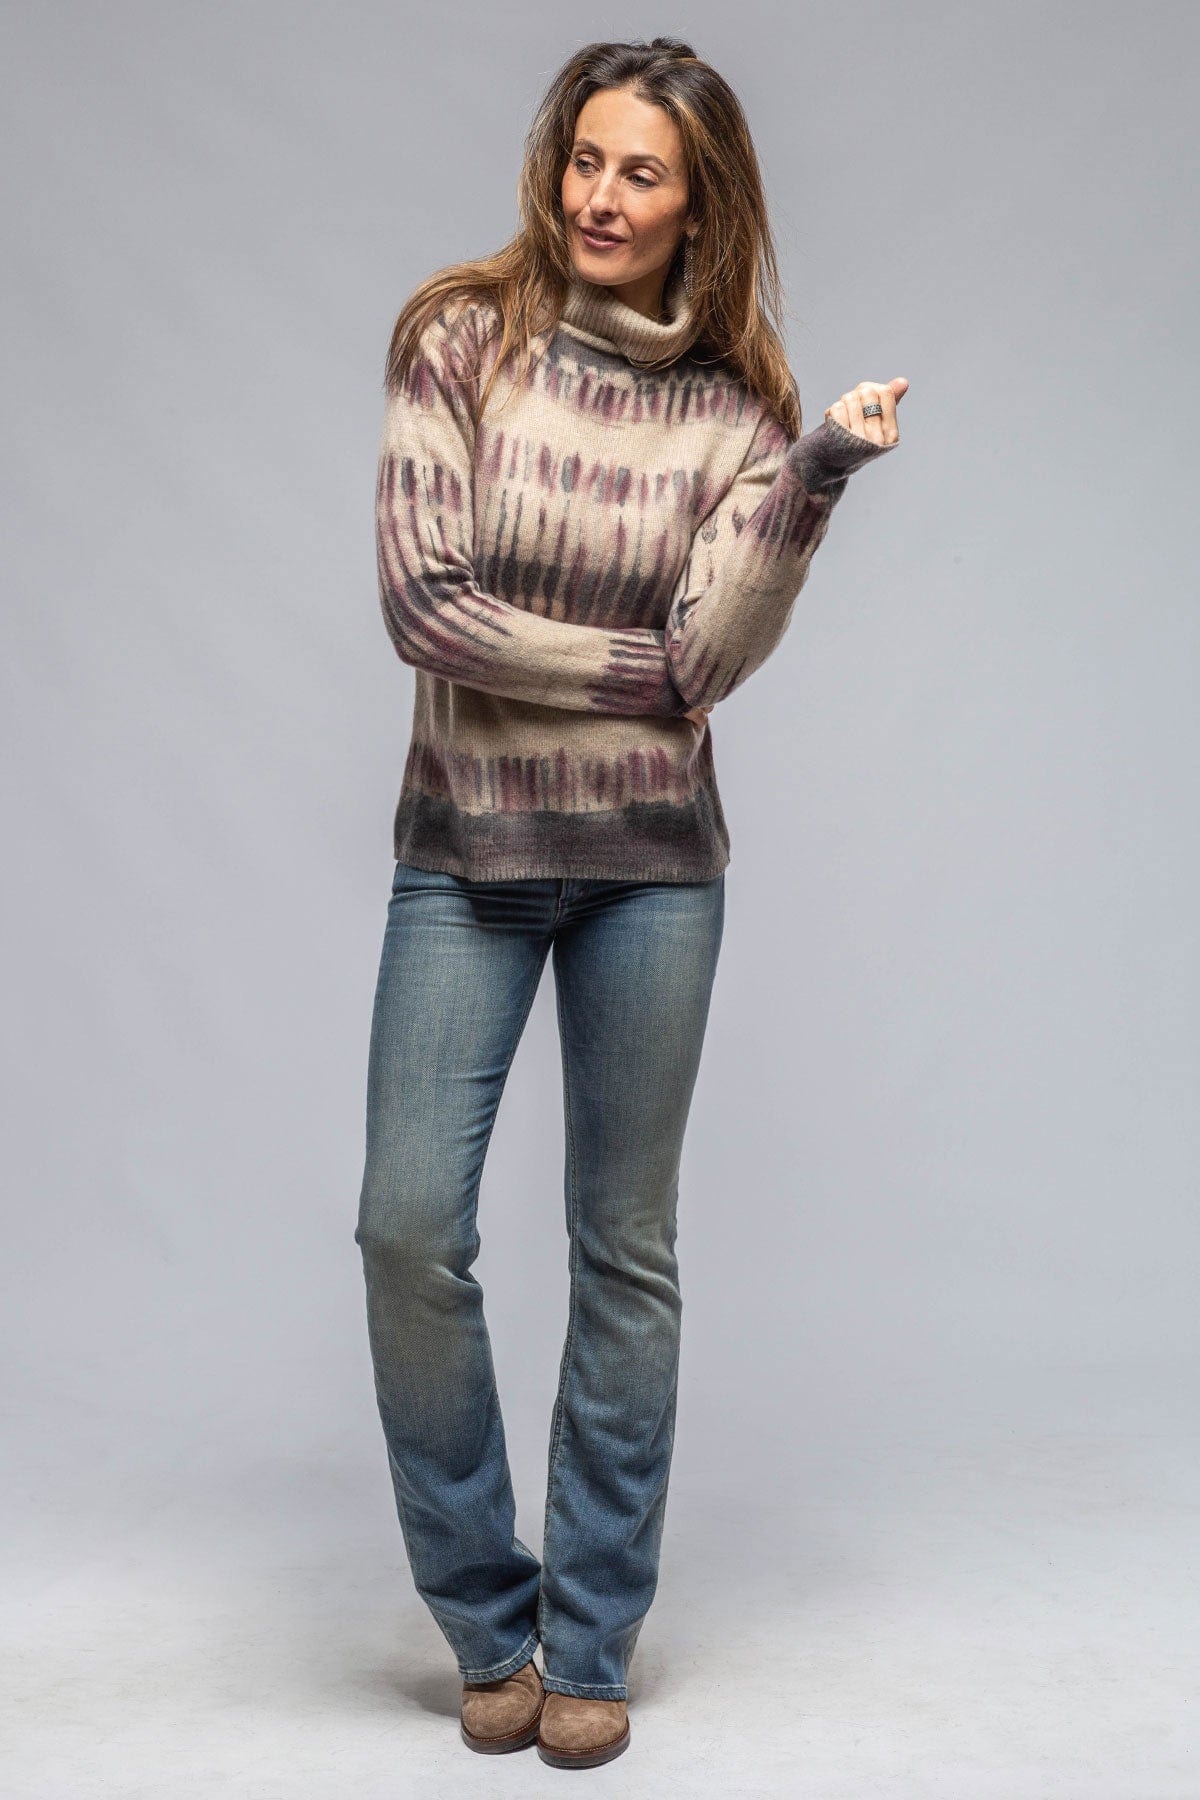 Margo T.Neck Sweater In Camel/Purple/Charcoal - AXEL'S